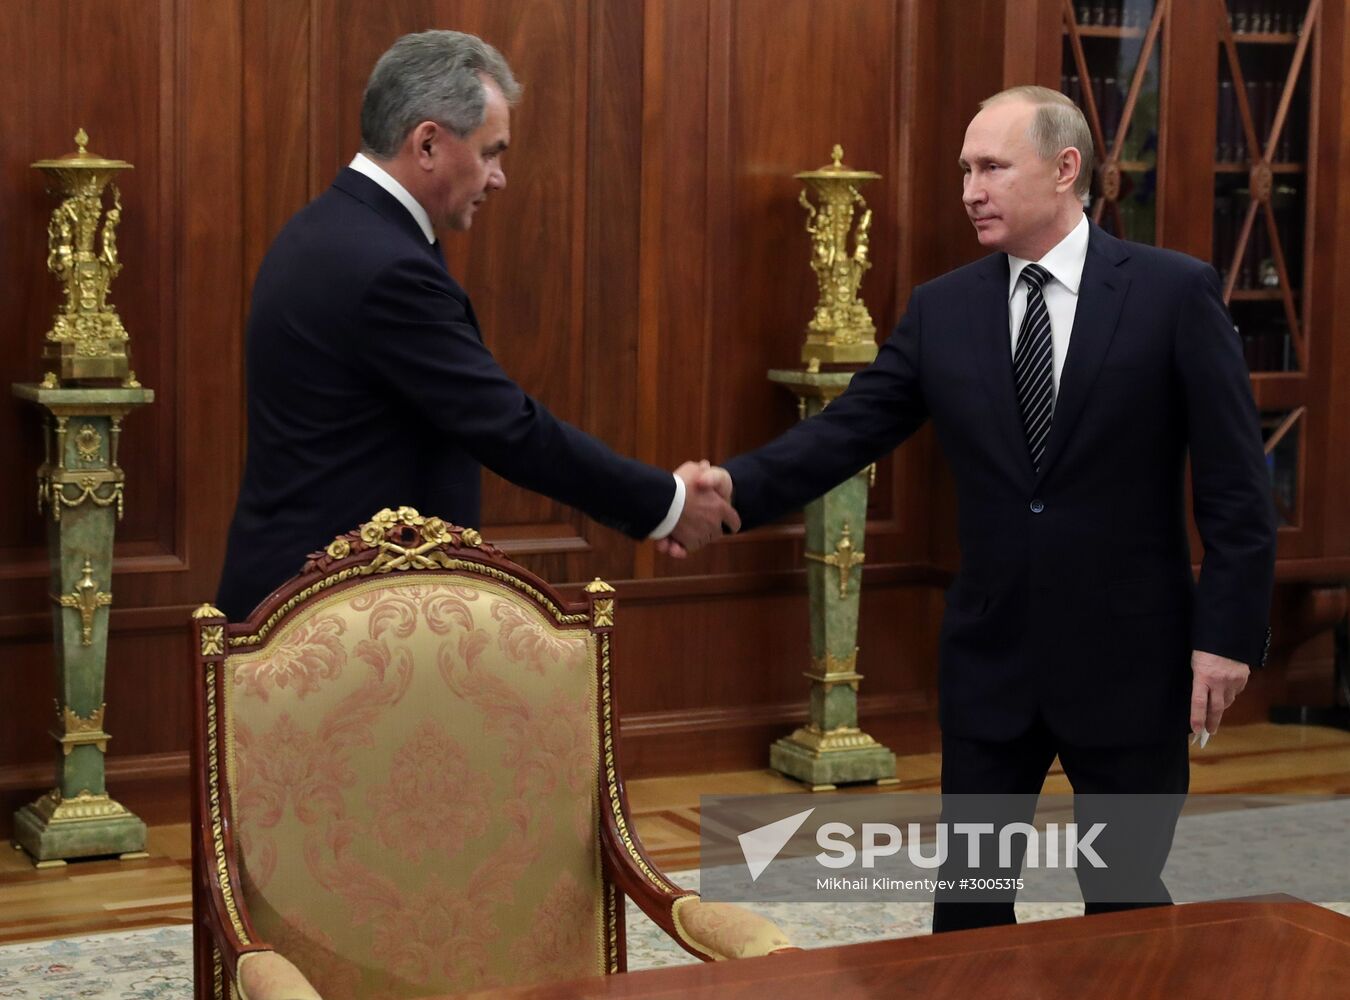 Russian President Vladimir Putin meets with Defense Minister Sergei Shoigu and Foreign Minister Sergei Lavrov